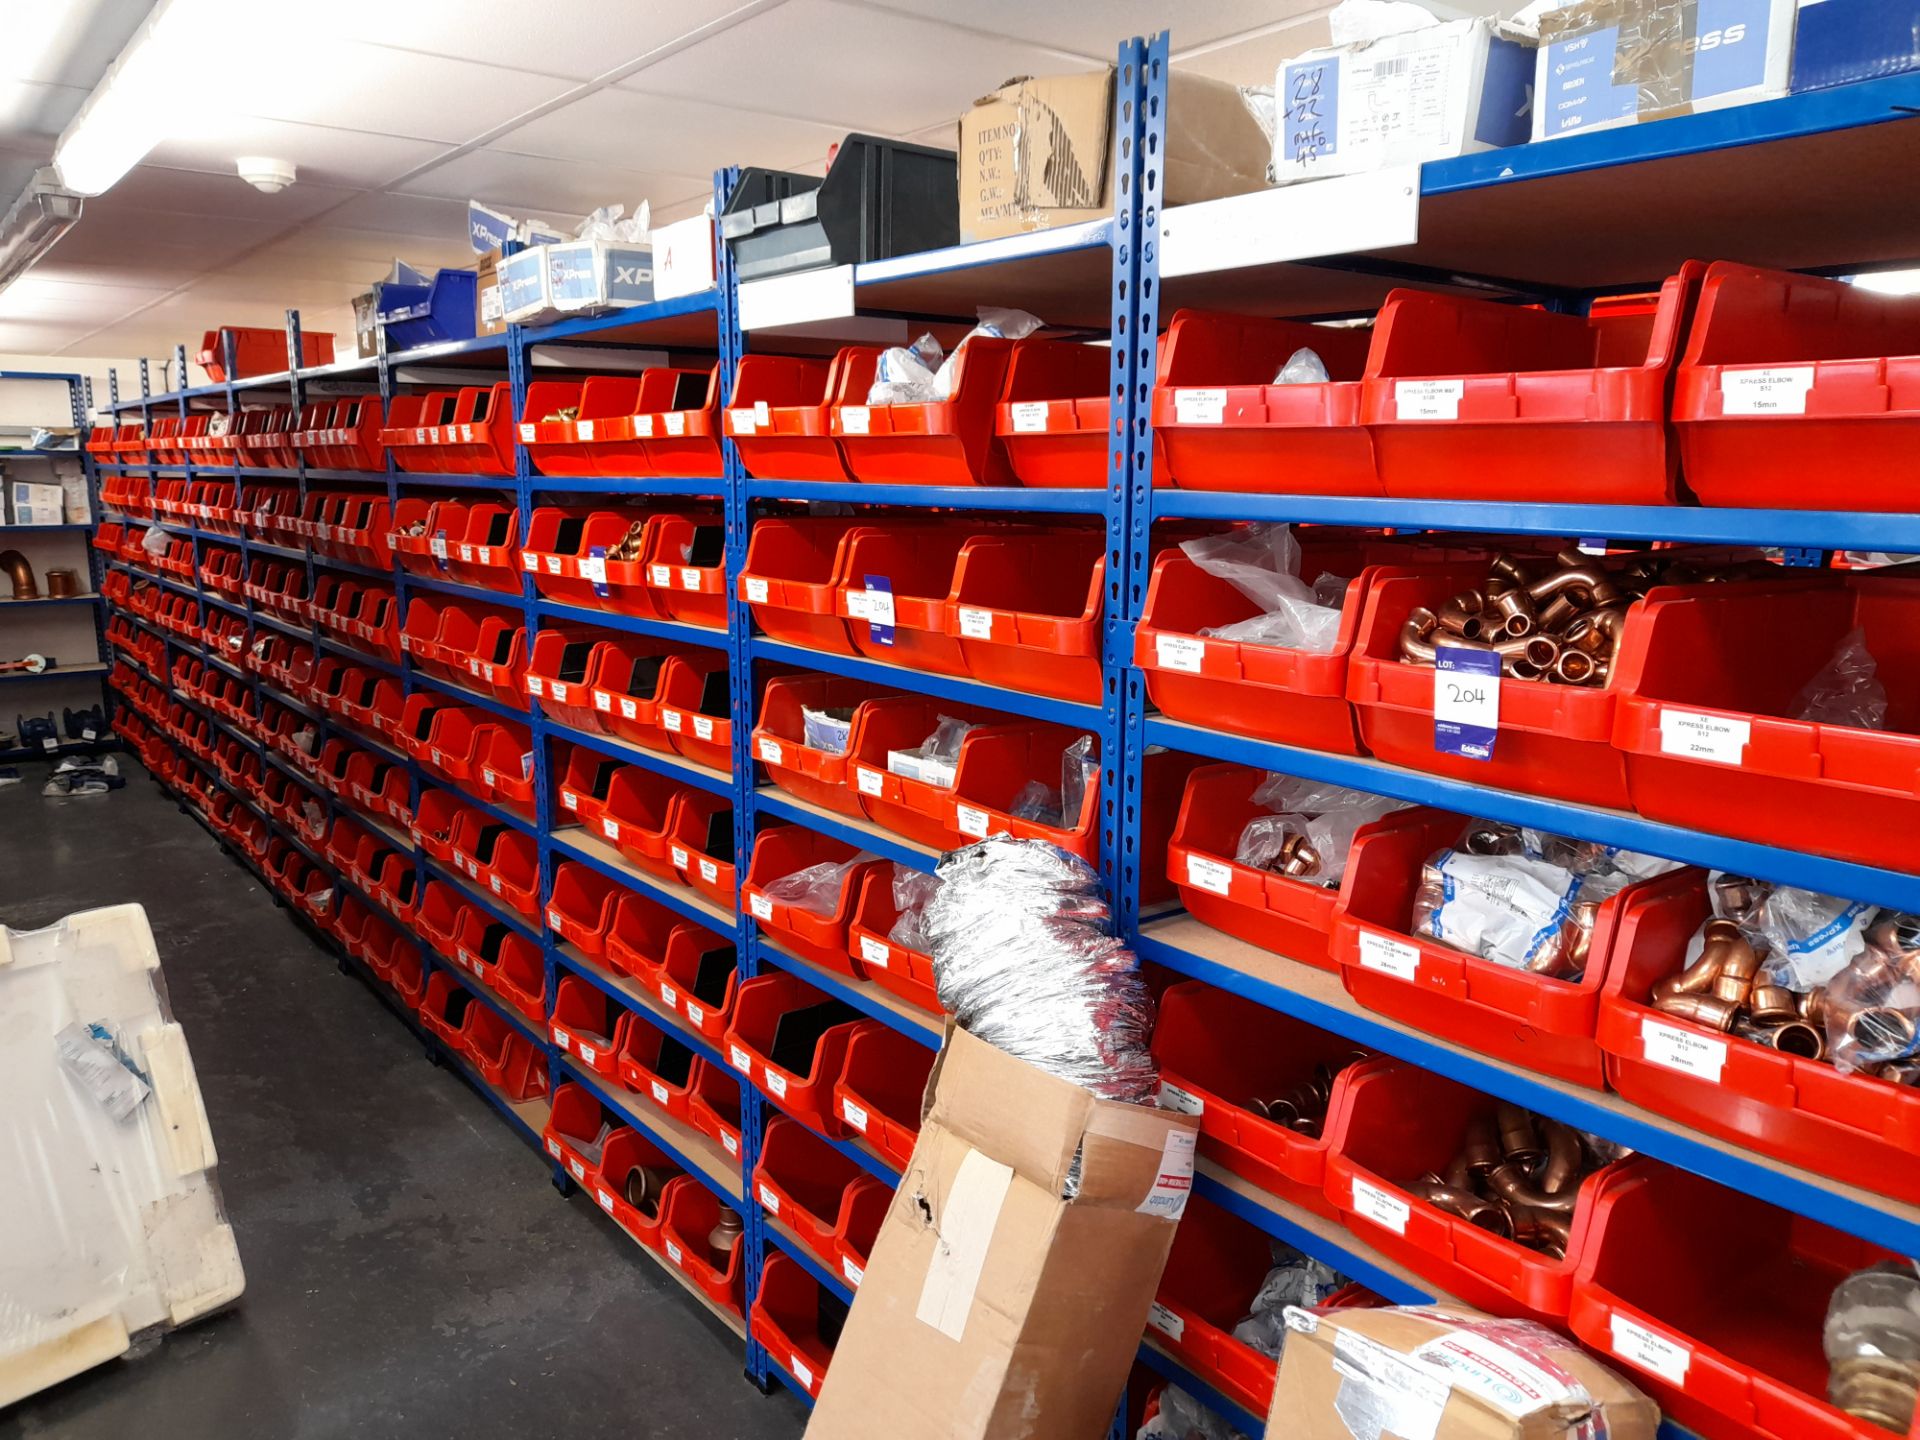 11 x bays of boltless lightweight shelving 2200 x 920 x 920 (Delayed collection, to be arranged with